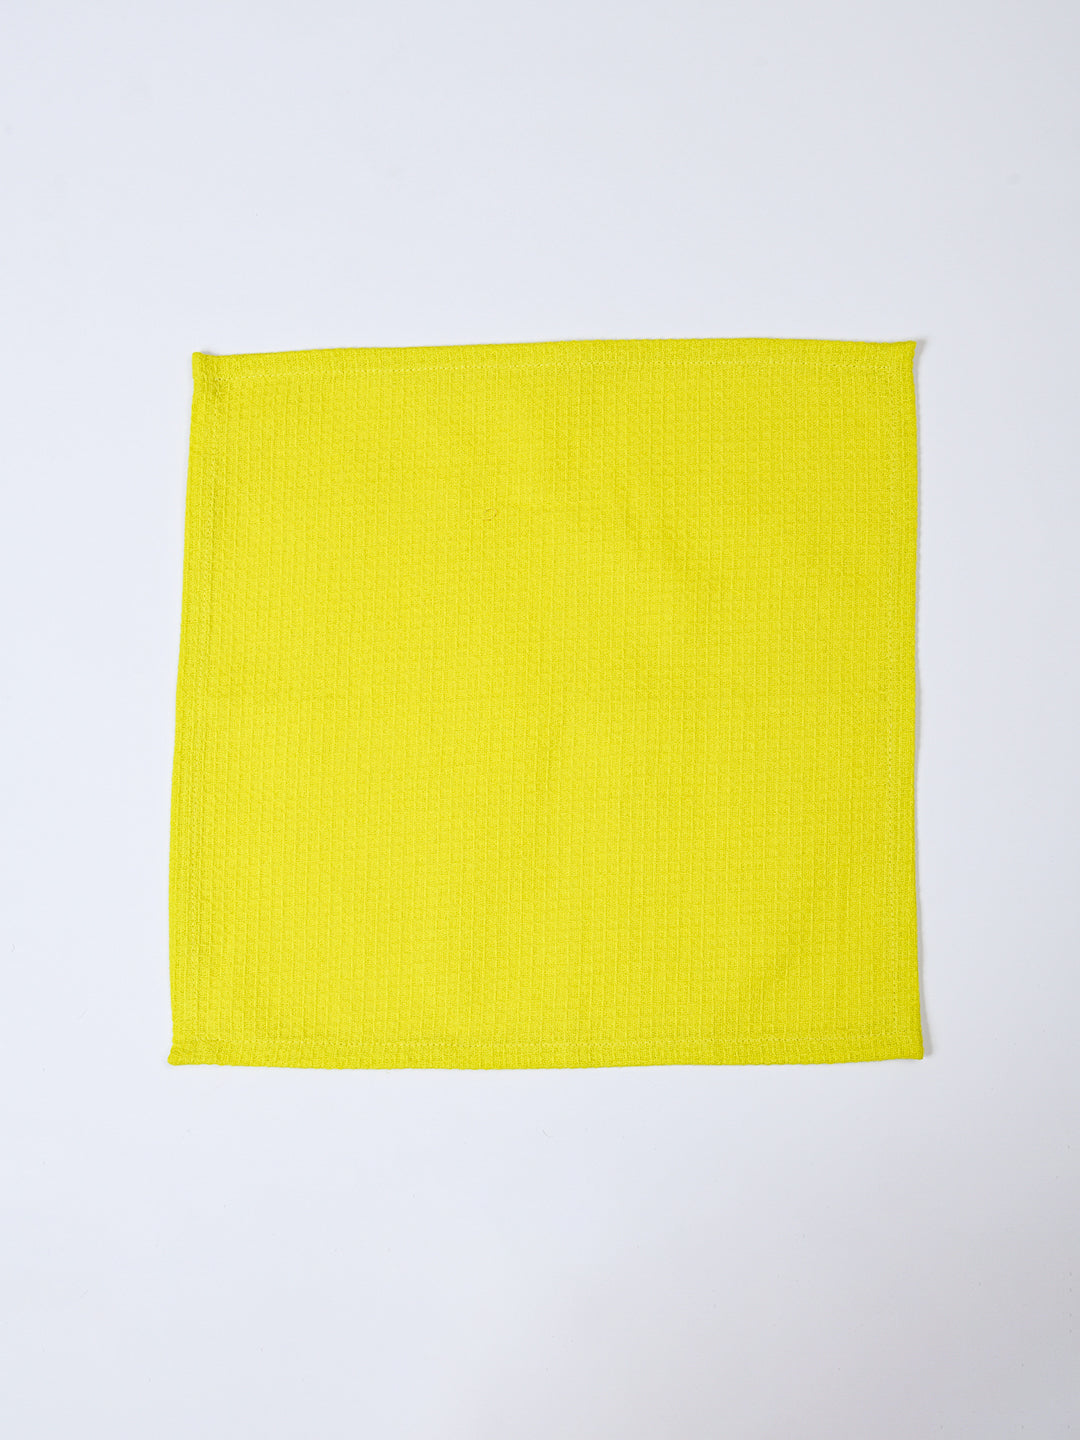 Blue & Yellow Cotton Waffle 11x11 Inch Face Towel Set of 6